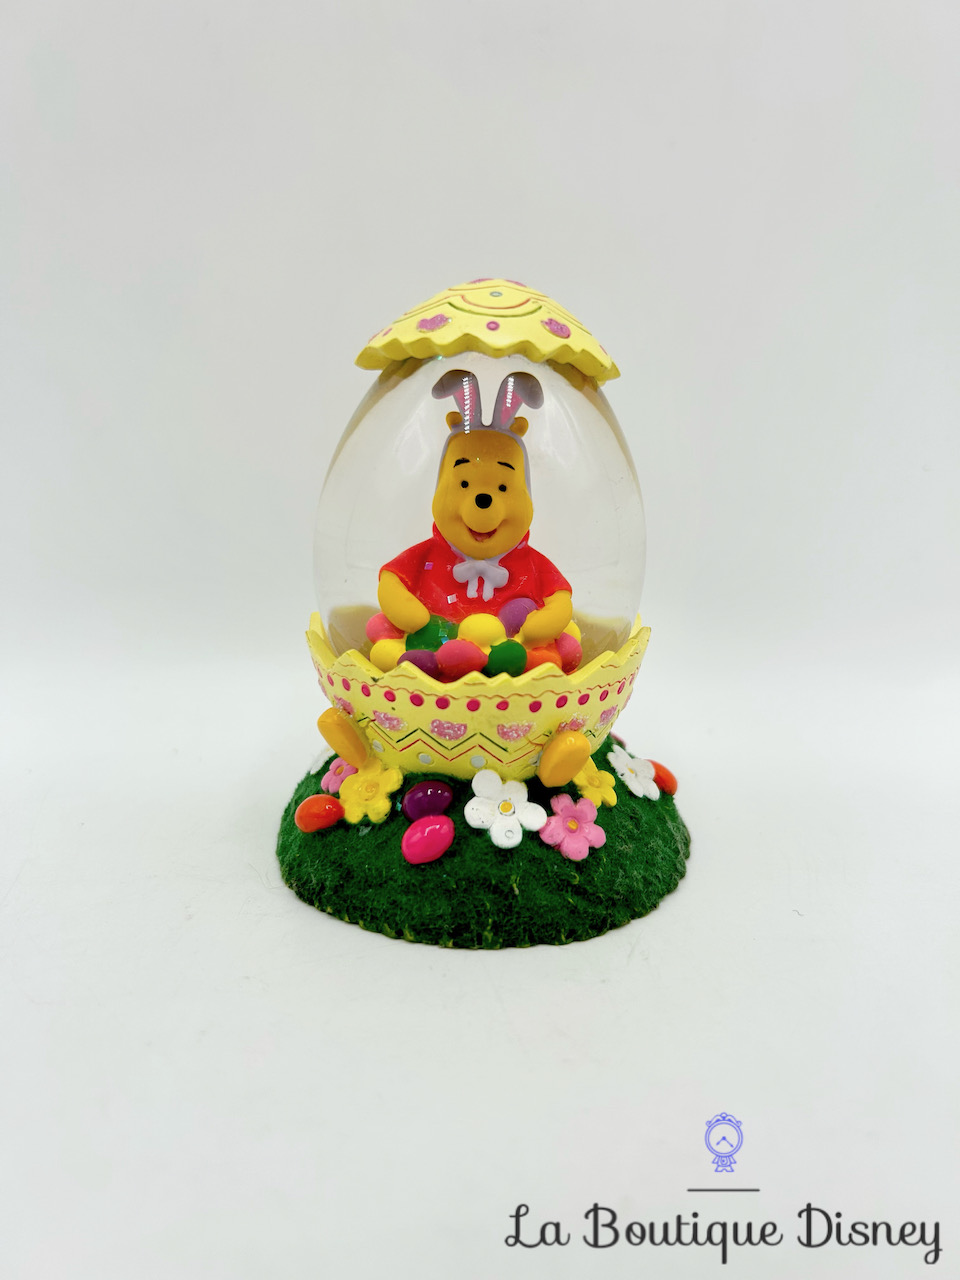 boule-a-neige-winnie-ourson-paques-disney-store-easter-lapin-snow-globe-pooh-2